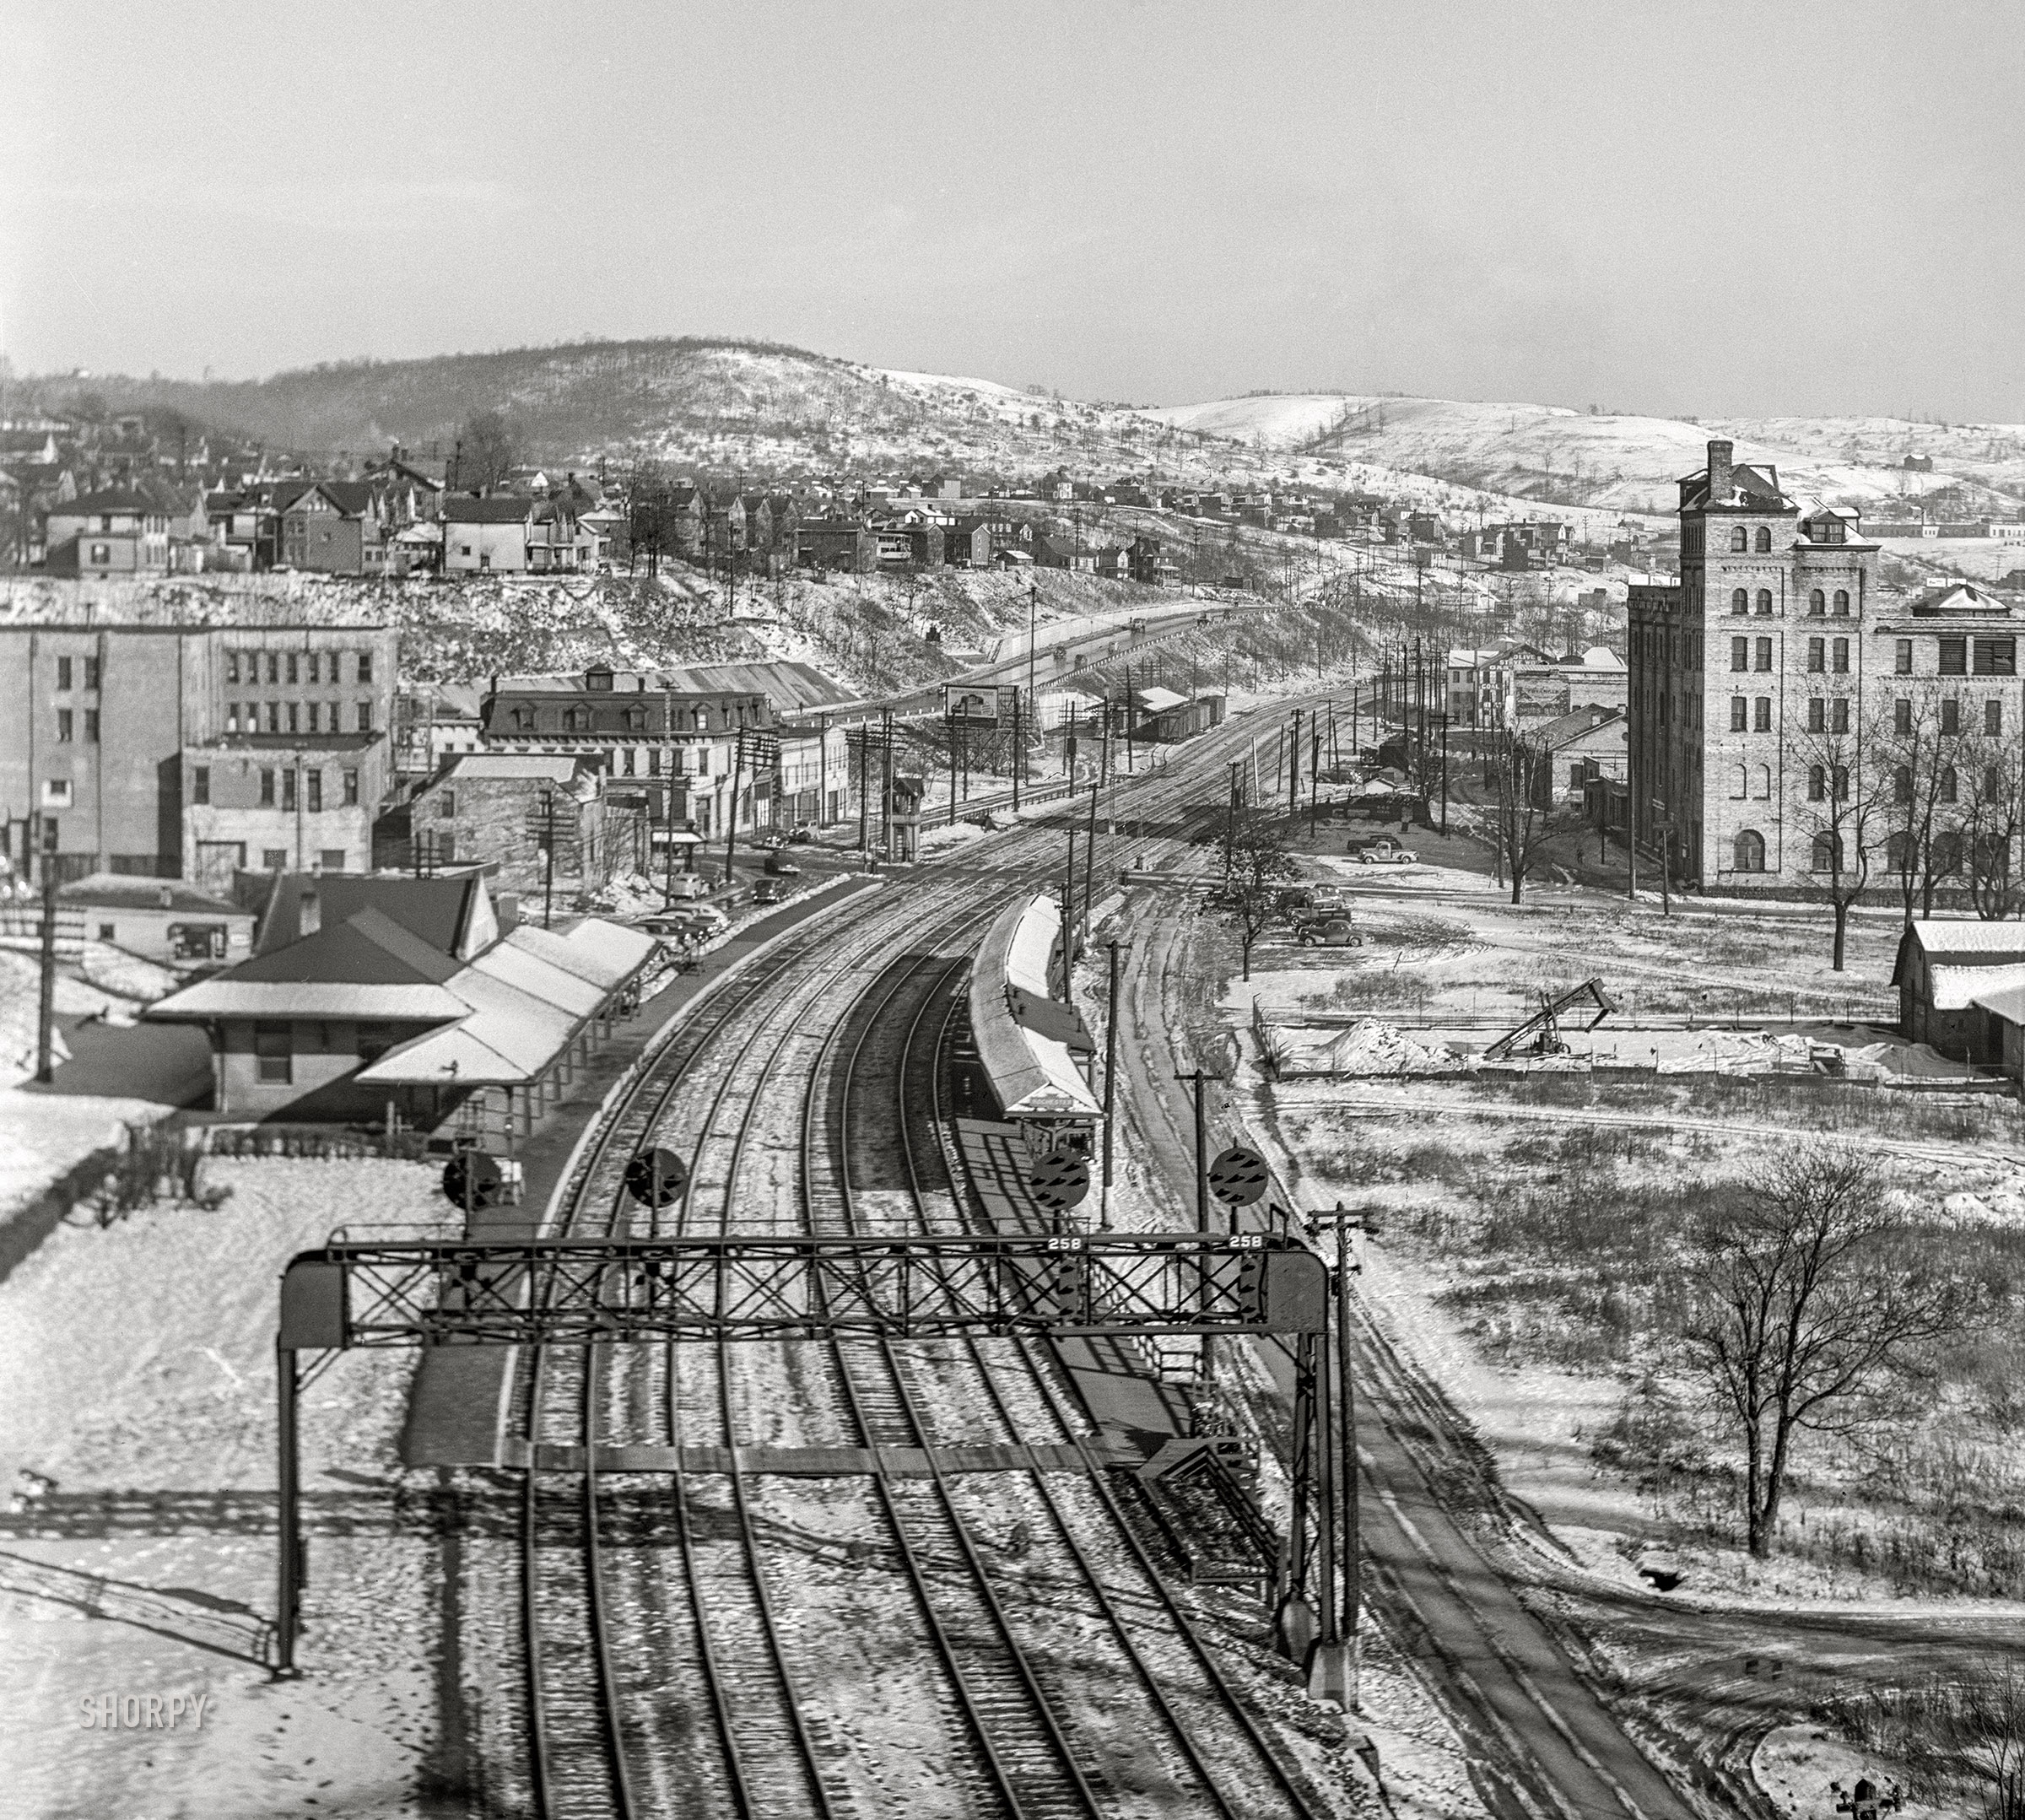 January 1941. "Rochester, Pennsylvania. Ohio River town." Continuing the vista last seen here. Medium format negative by John Vachon for the Farm Security Administration. View full size.